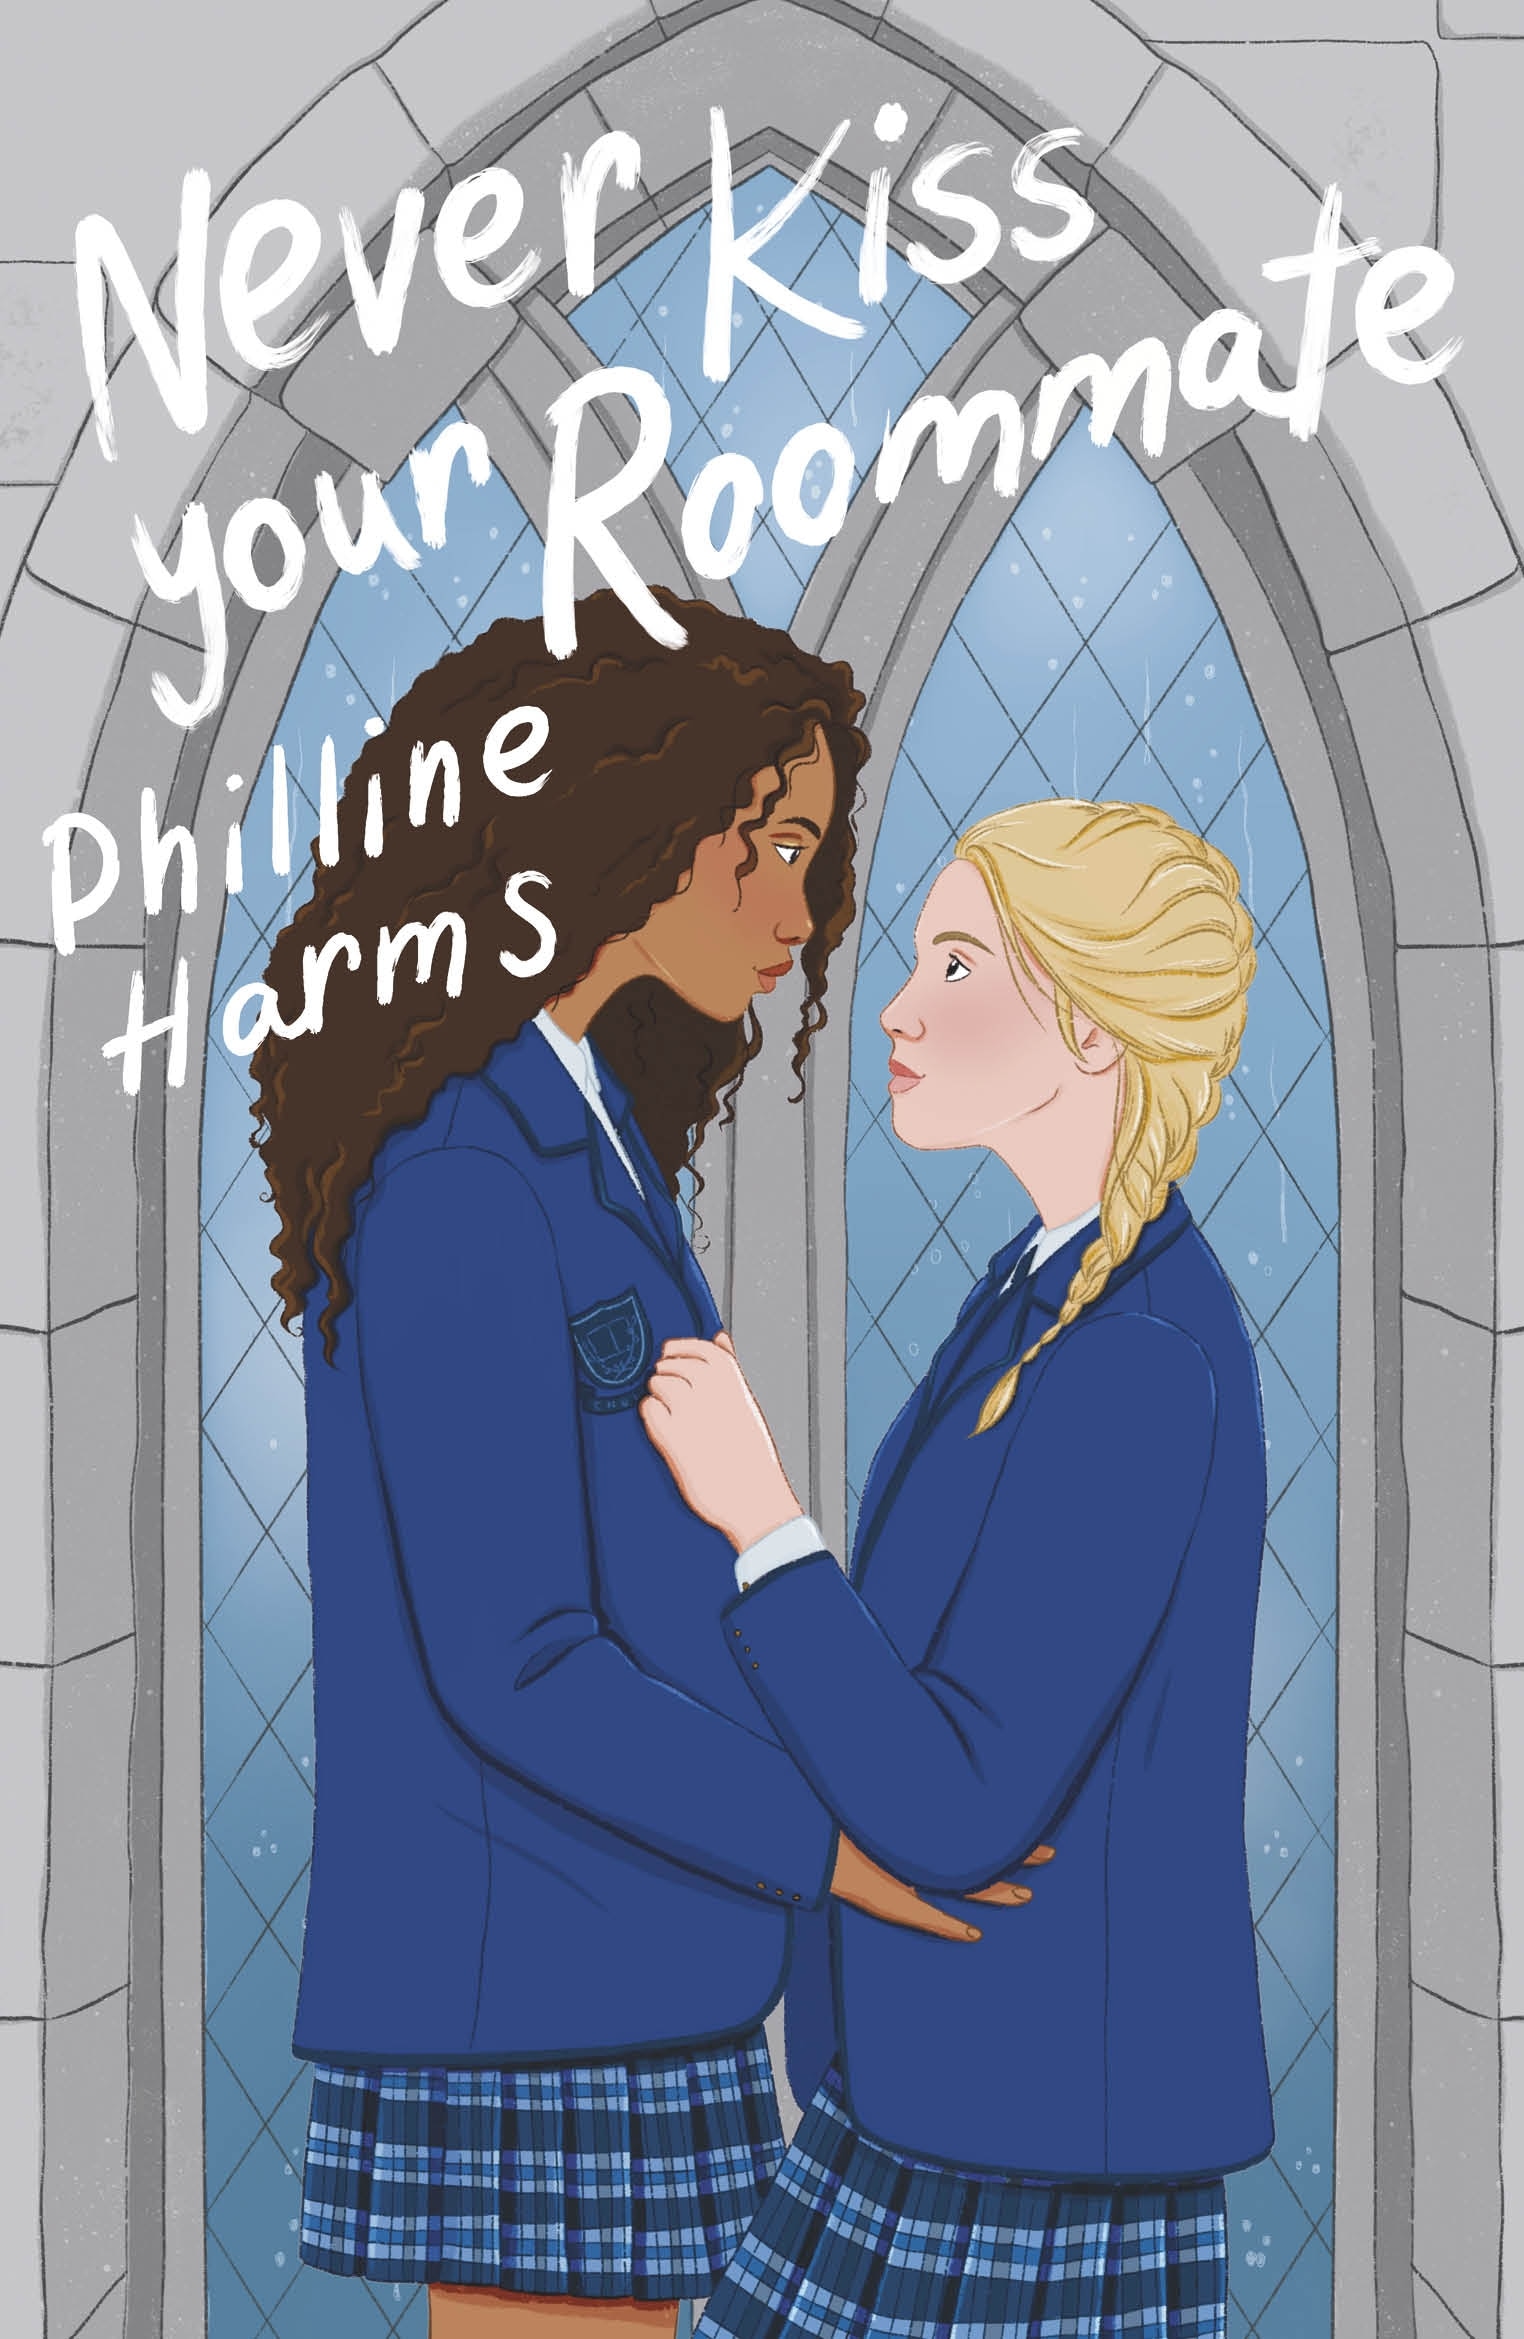 Book “Never Kiss Your Roommate” by Philline Harms — June 24, 2021